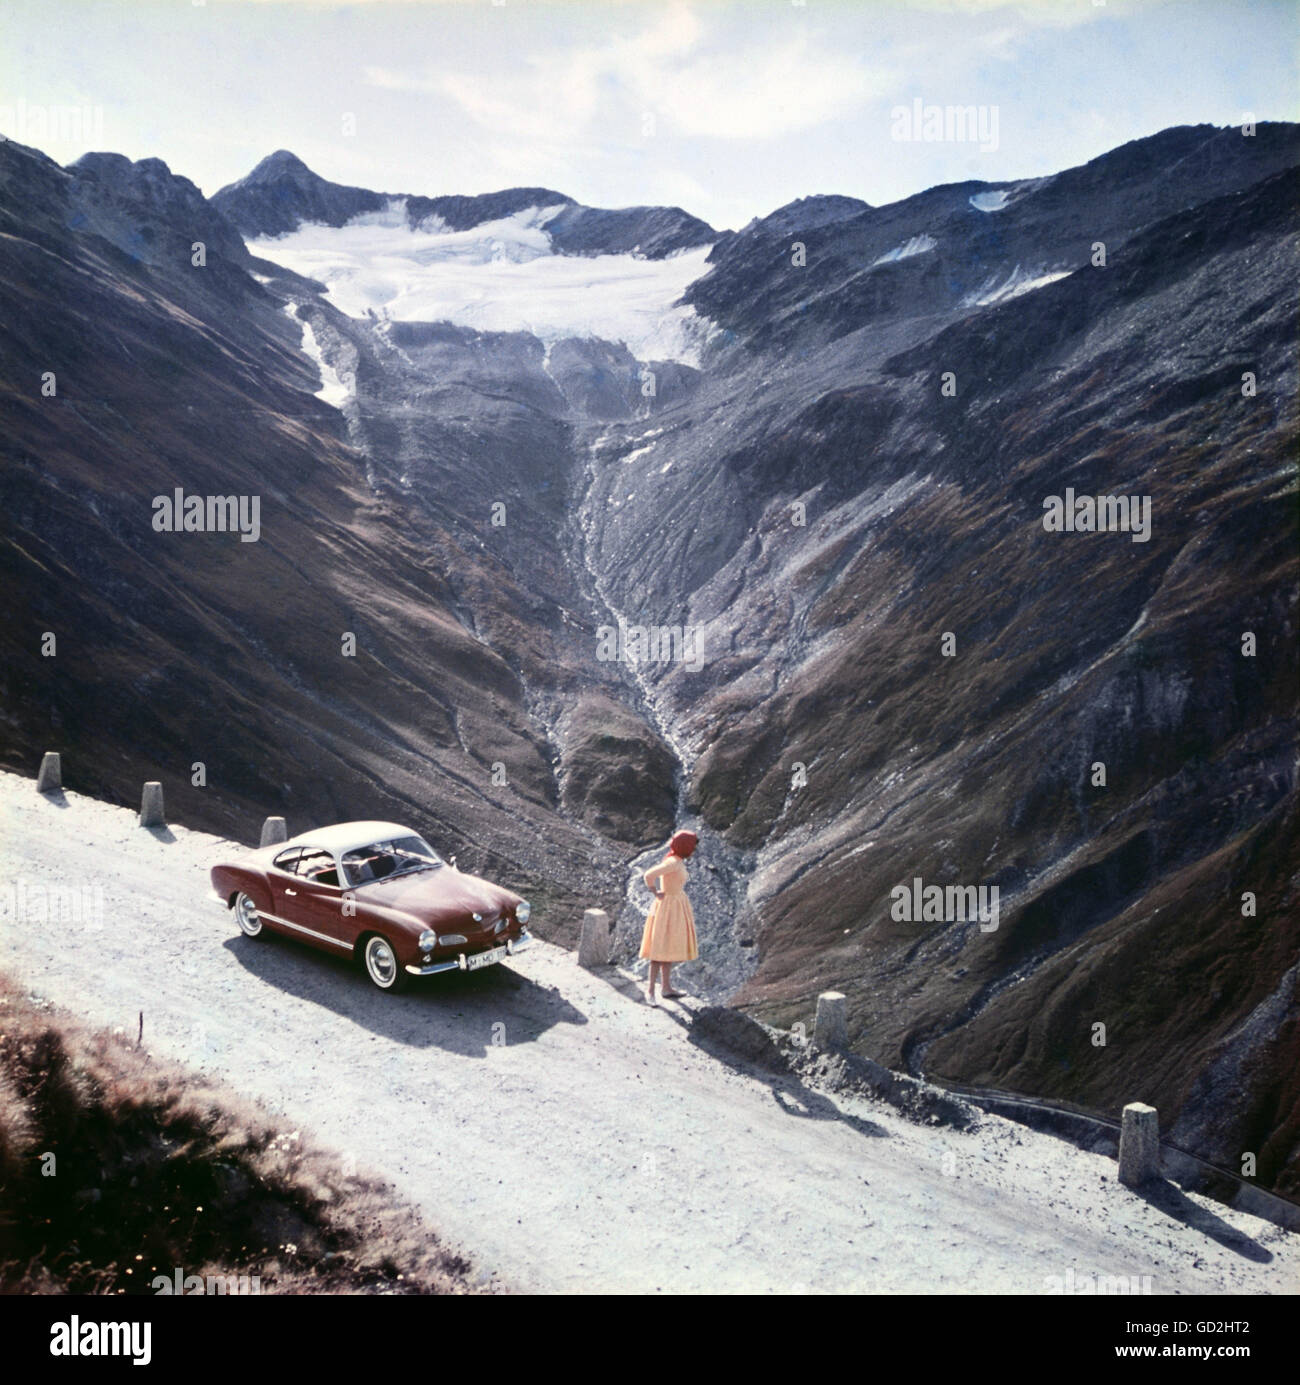 transport / transportation, cars, Volkswagen, VW 1500 Karmann-Ghia coupe, vehicle variants 14, rest on a mountain road, circa 1960, vehicle, vehicles, people, woman, women, female, mounts, mount, mountains, mountain, Alps, glacier, glaciers, road, roads, journey, holiday, vacation, holidays, leisure time, free time, spare time, 20th century, Karmann Ghia, transport, transportation, cars, car, vehicle variants, vehicle variants, historic, historical, 1950s, 1960s, Additional-Rights-Clearences-Not Available Stock Photo